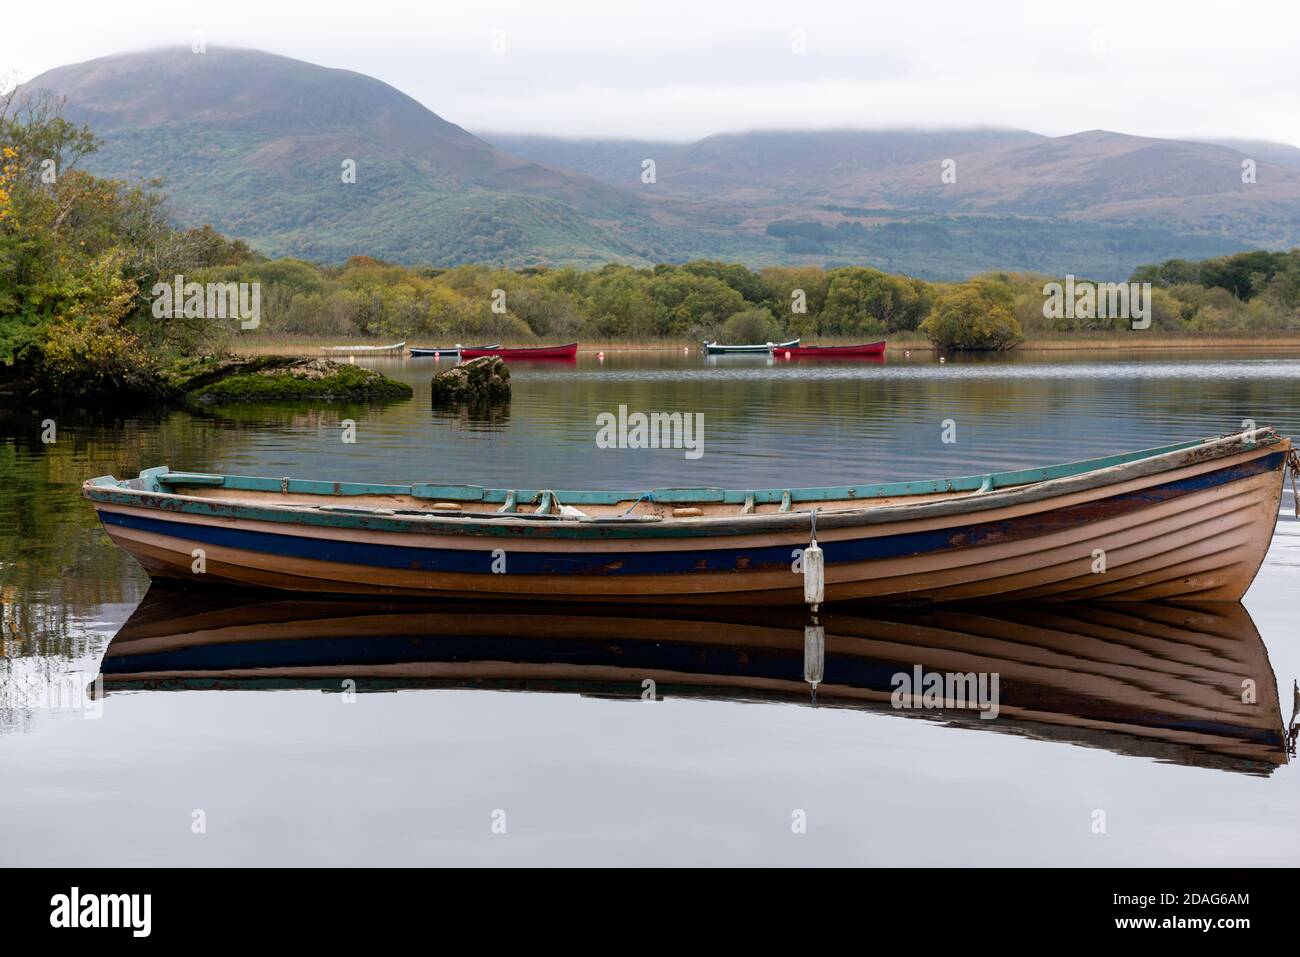 Fishing boat on calm Lough Leane lake with moored fishing boats and Eagle's Nest Mountain in Killarney National Park, County Kerry, Ireland, Europe. Stock Photo